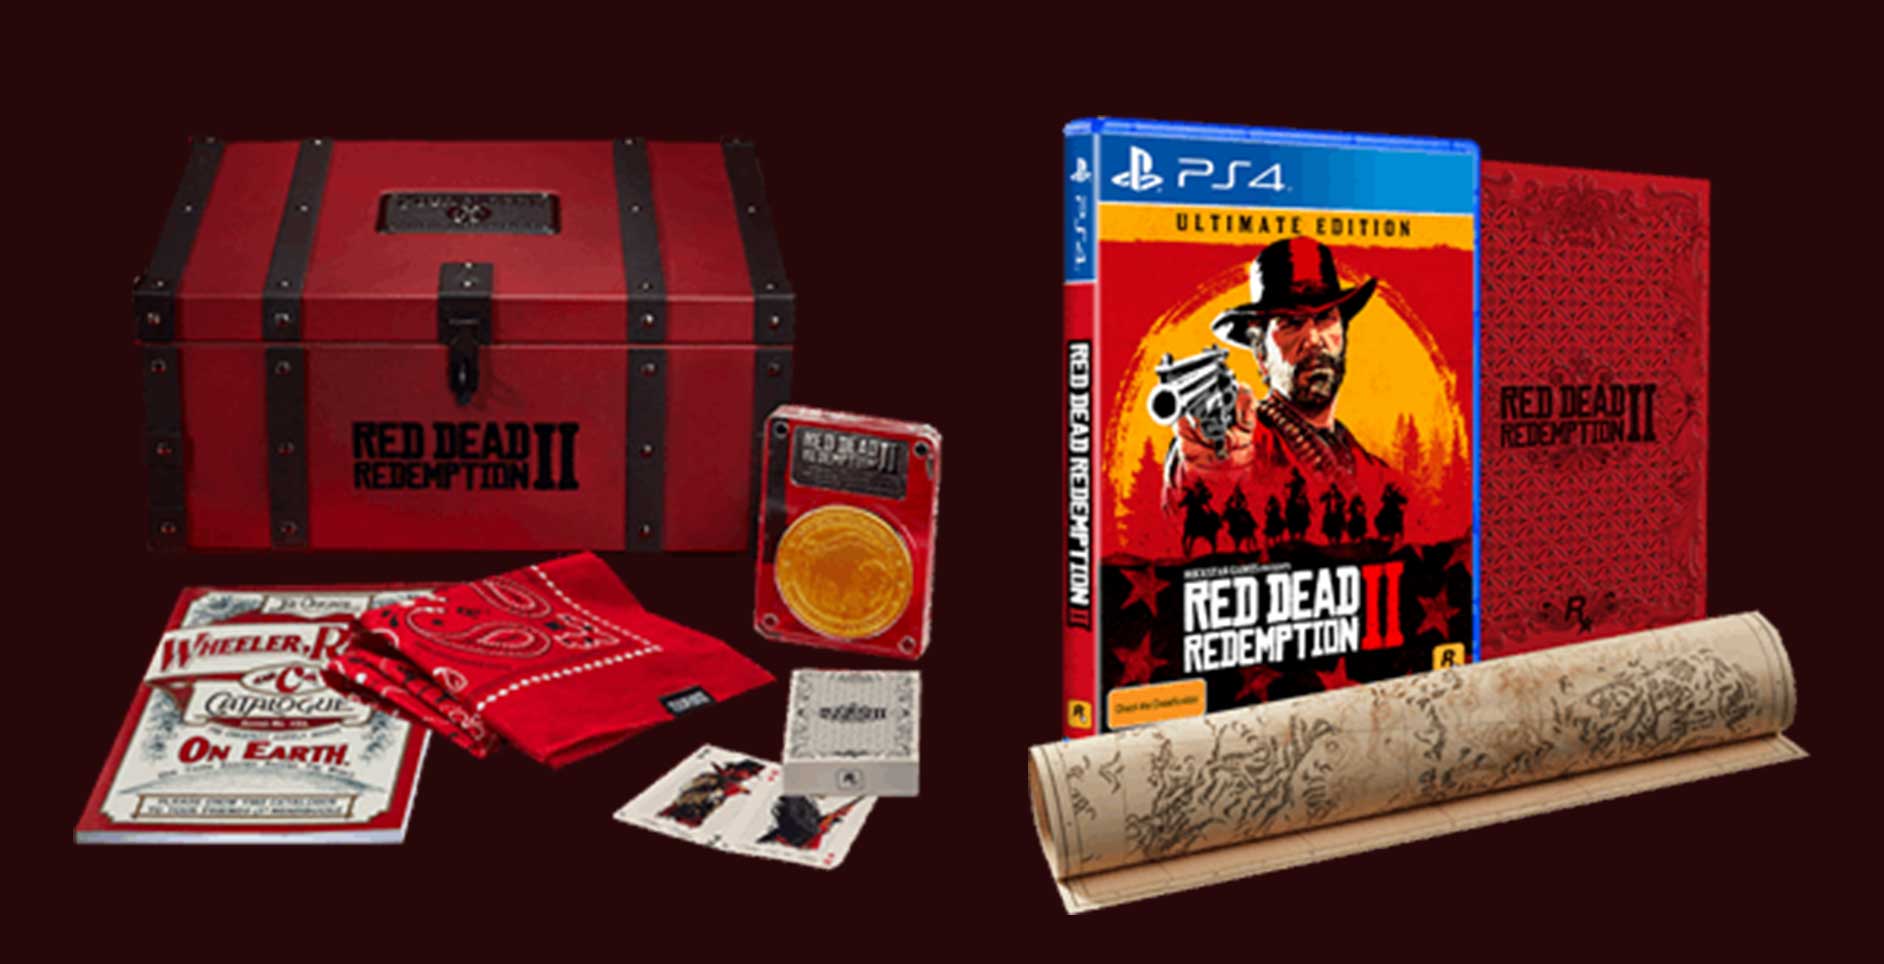 Baron plisseret Remission Australia Is Getting Red Dead Redemption 2 Collectors/Ultimate Editions